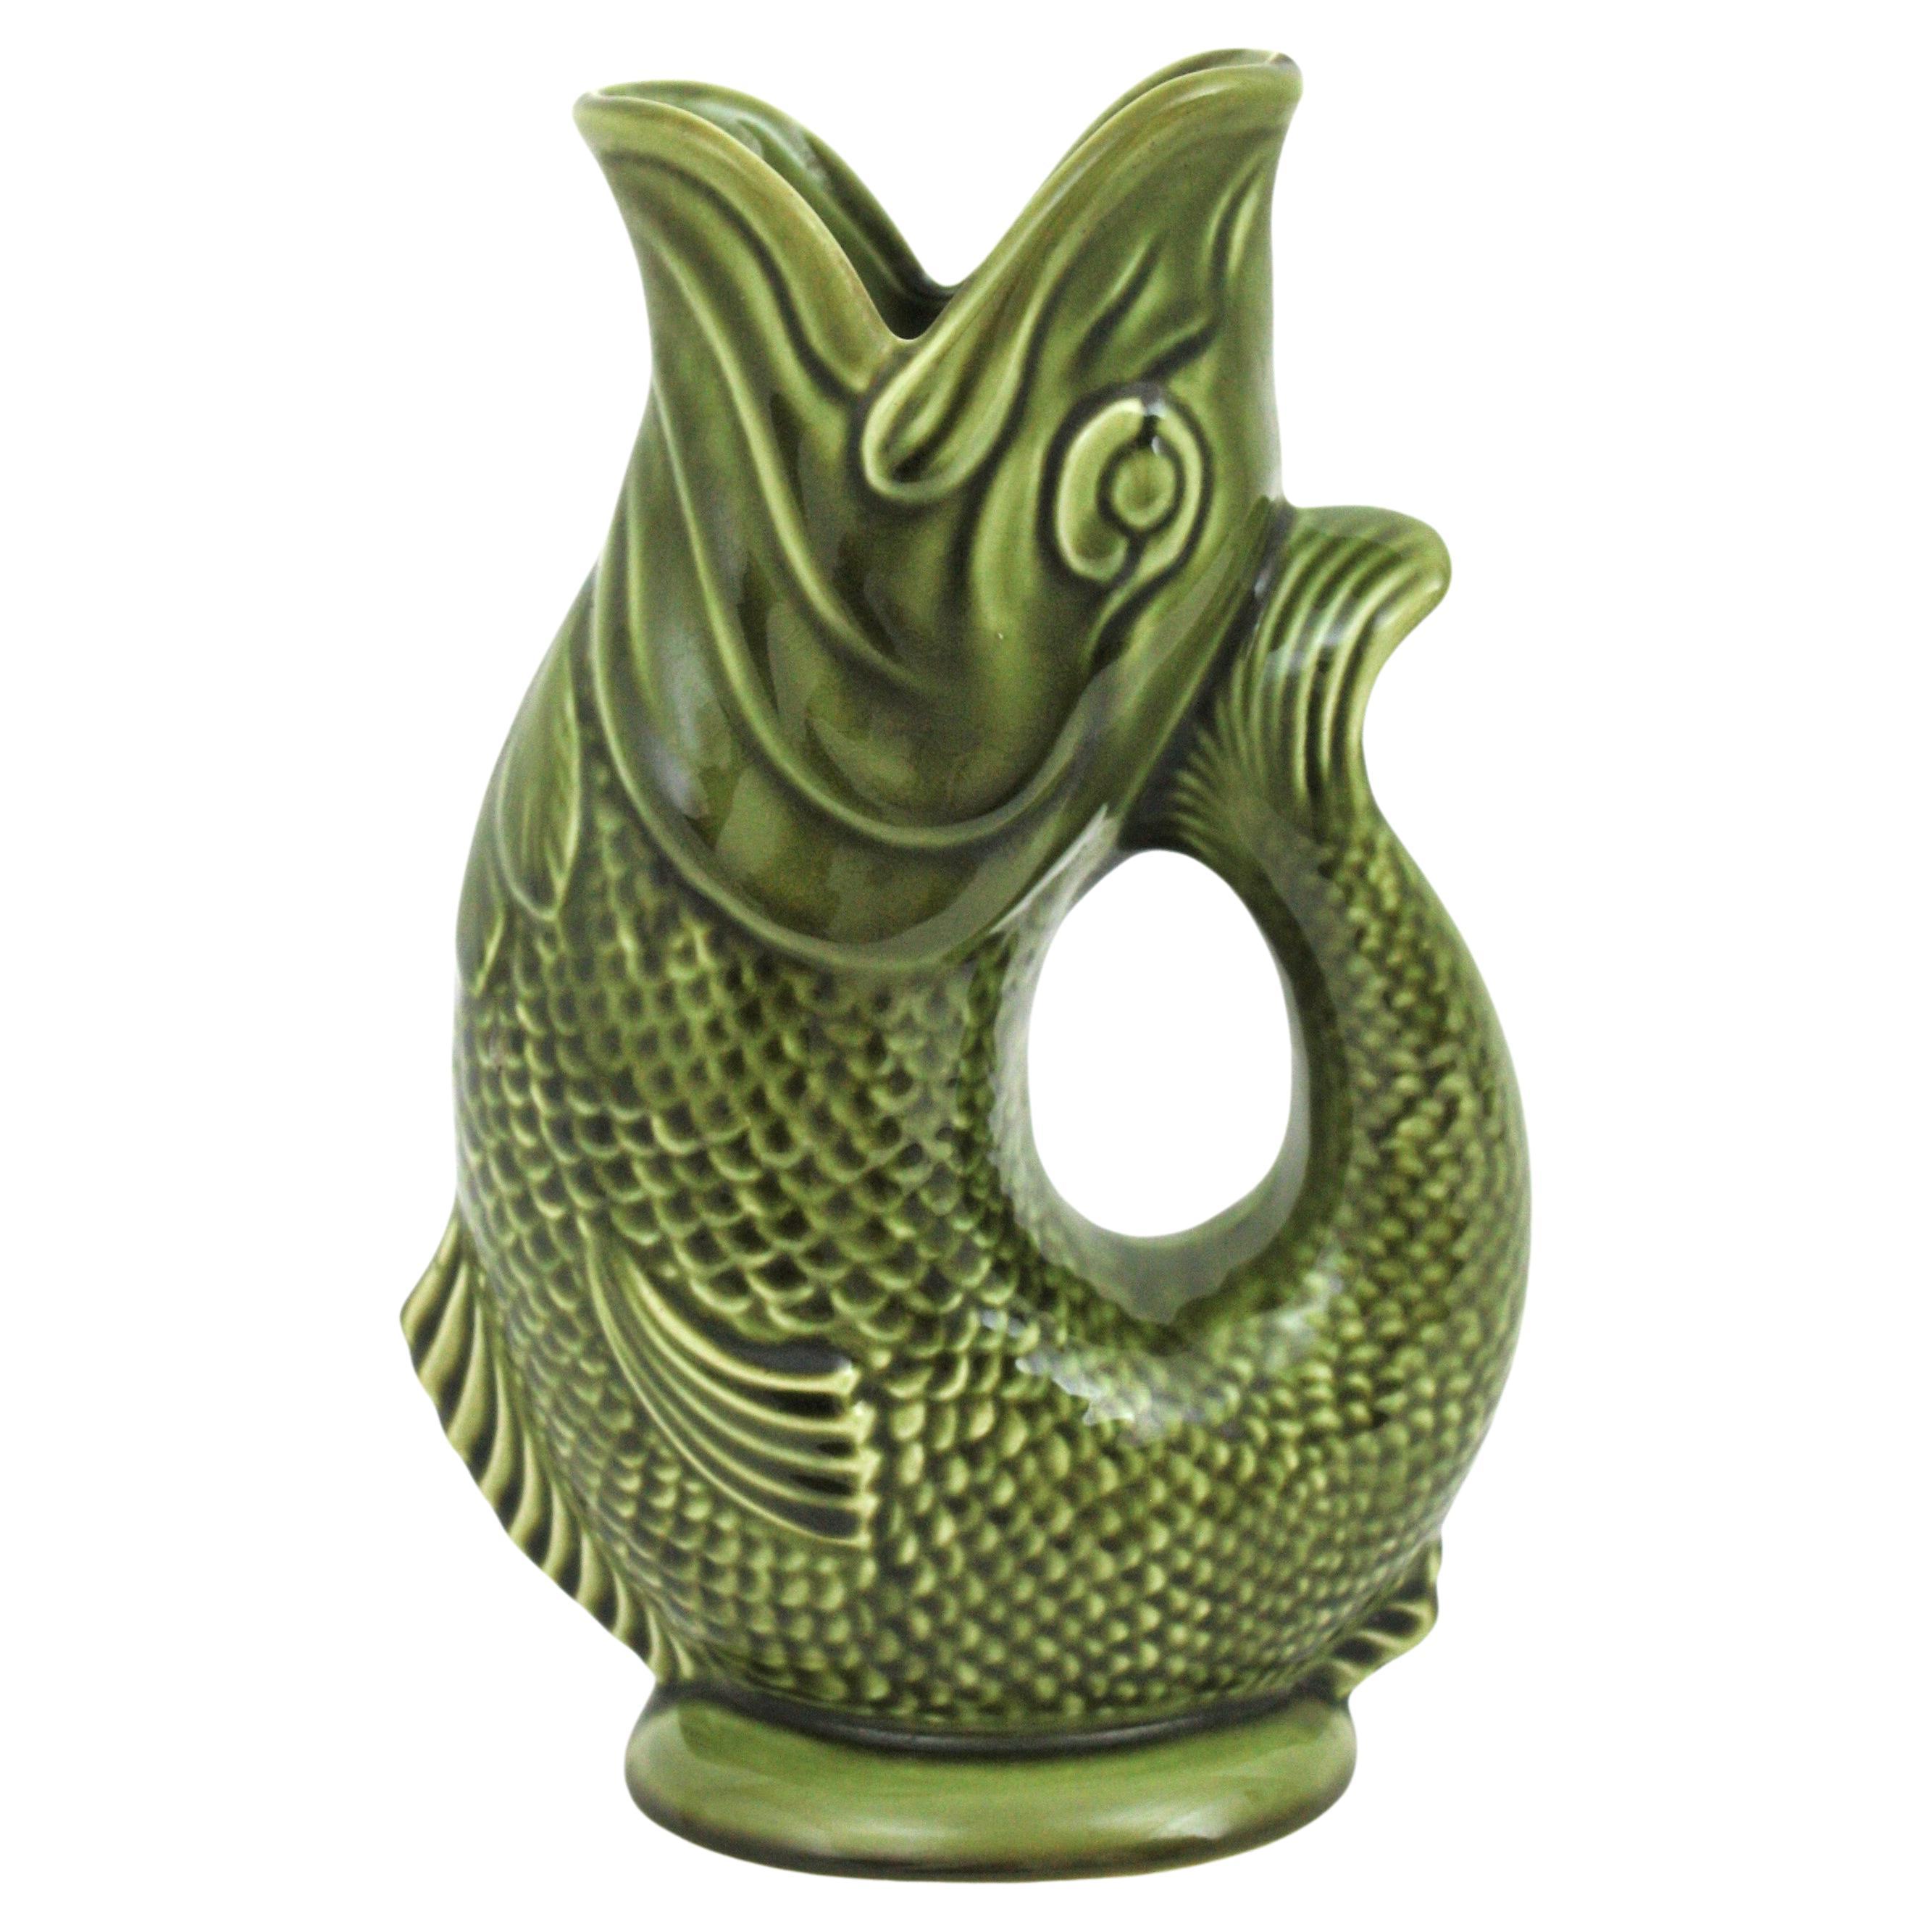 Oversized Mid-Century Modernist glazed ceramic gurgling fish water jug / pitcher. England, 1950s-1960s
Manufactured by Dartmouth Devon England.
Eye-catching large green Majolica ceramic vase, fish glug jug or pitcher.
This fish jug vase will be a